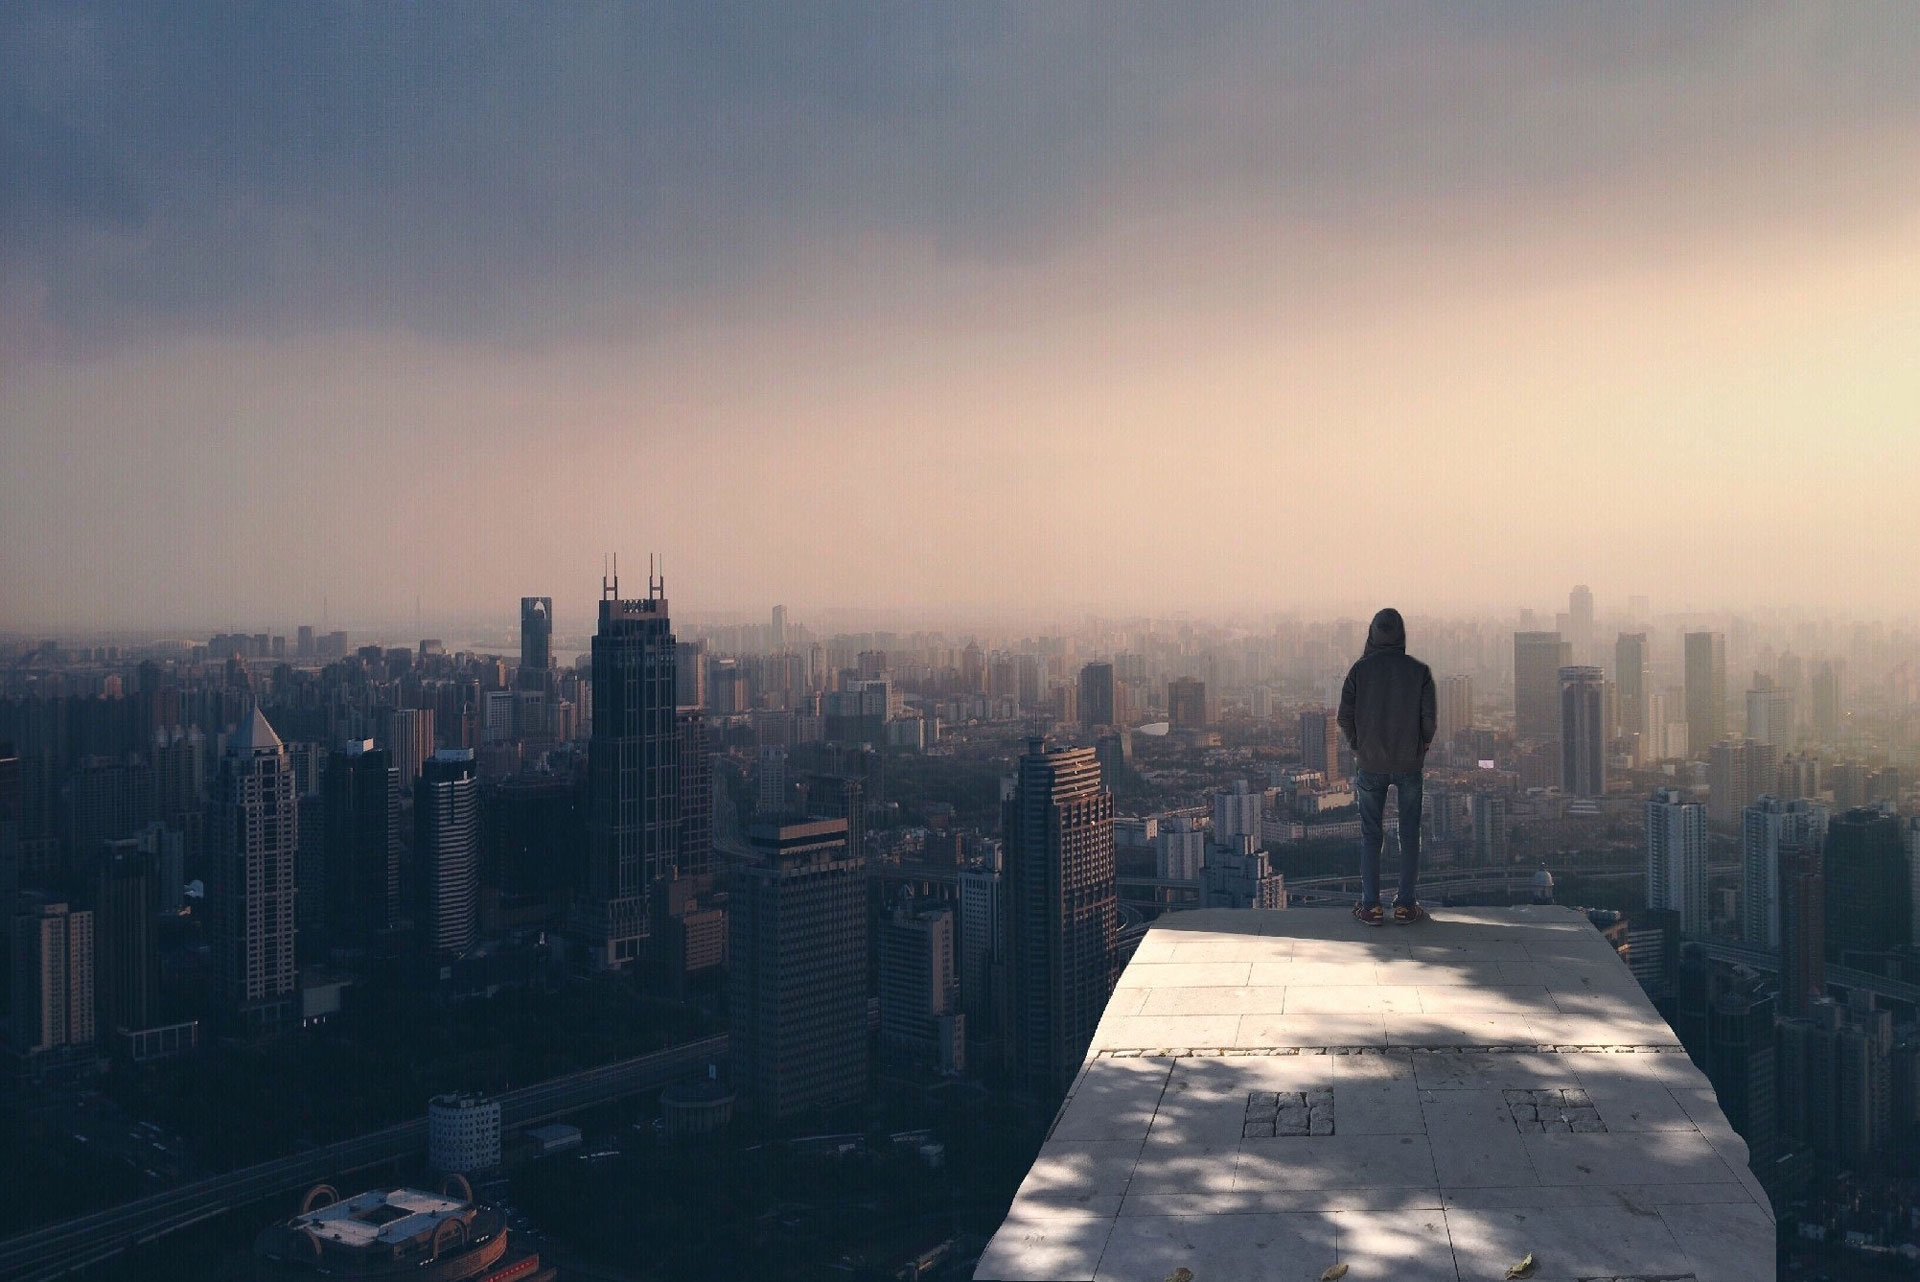 Man seen from the back on top of a building looking at the city in front of him